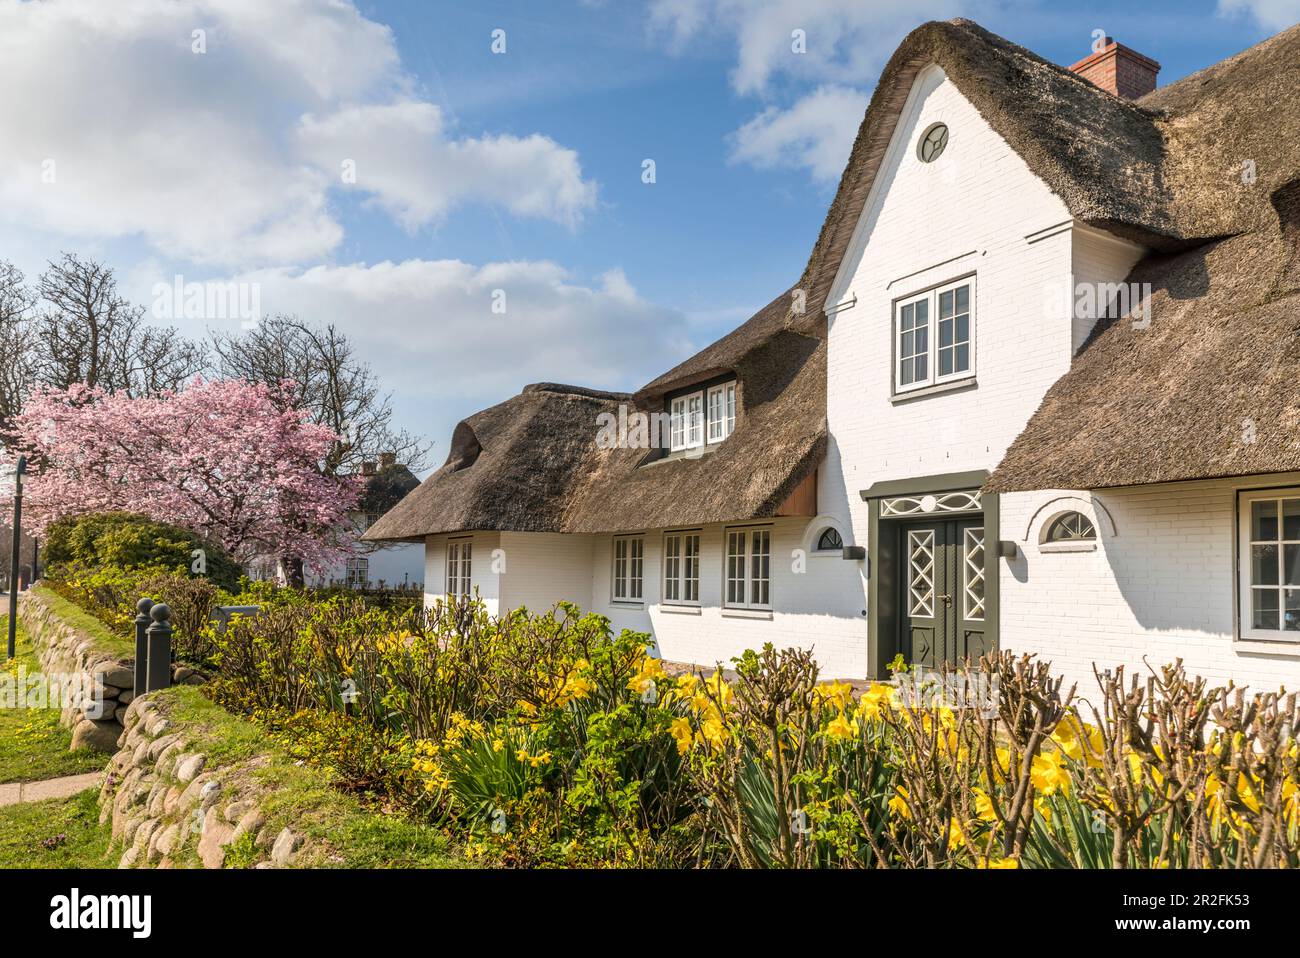 Thatched-roof houses with Friesenwall in Keitum, Sylt, Schleswig-Holstein, Germany Stock Photo